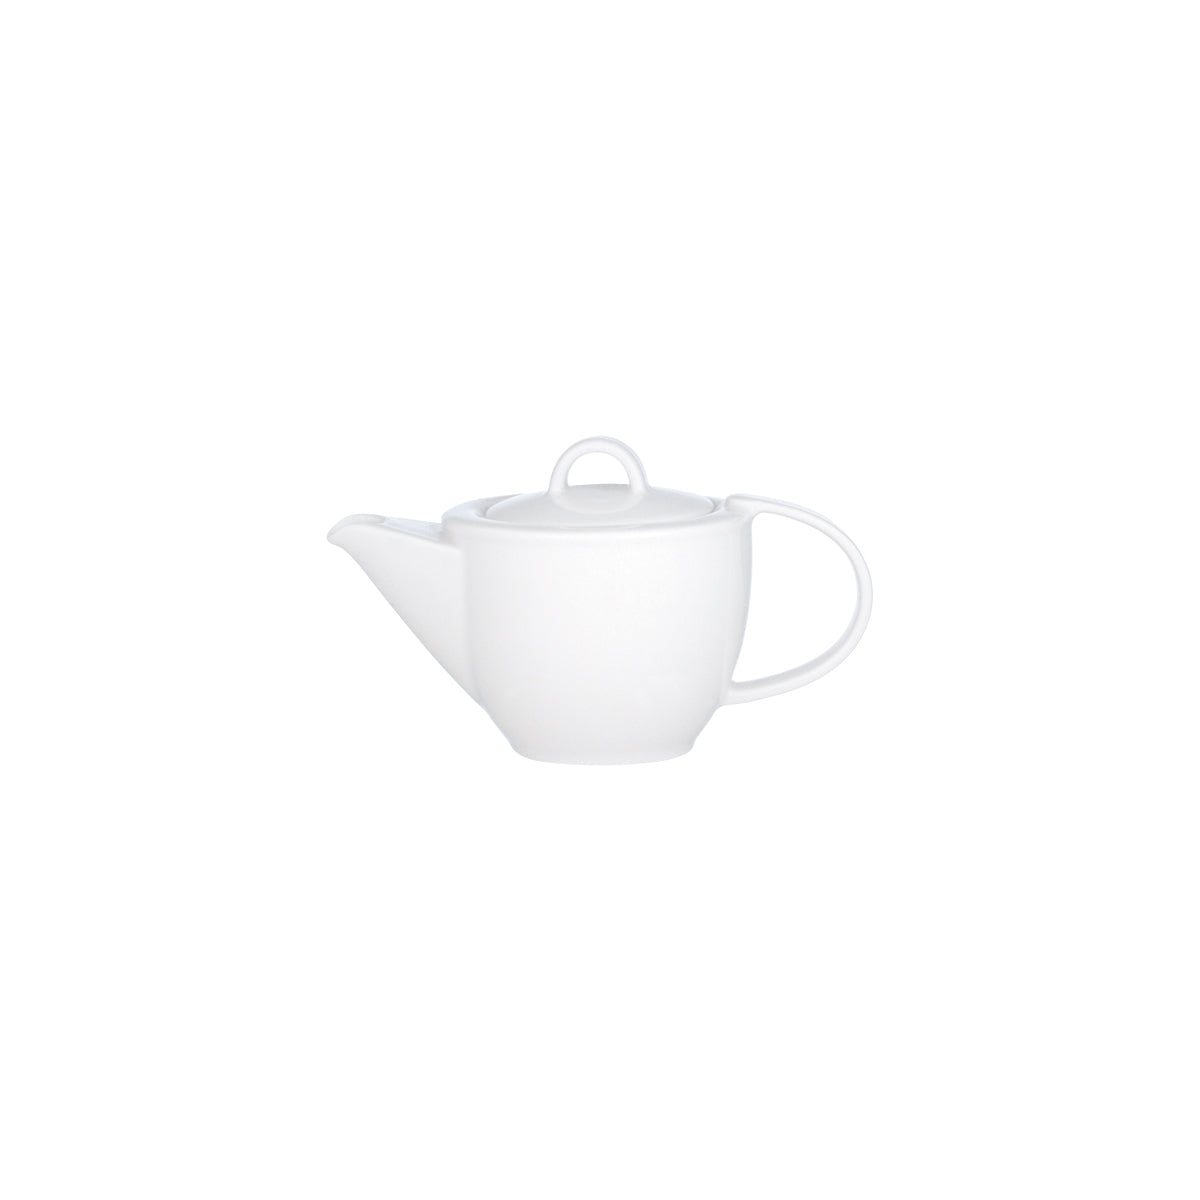 VB16-2016-0530 Villeroy And Boch Villeroy And Boch Corpo White Teapot No. 5 with Lid 400ml Tomkin Australia Hospitality Supplies